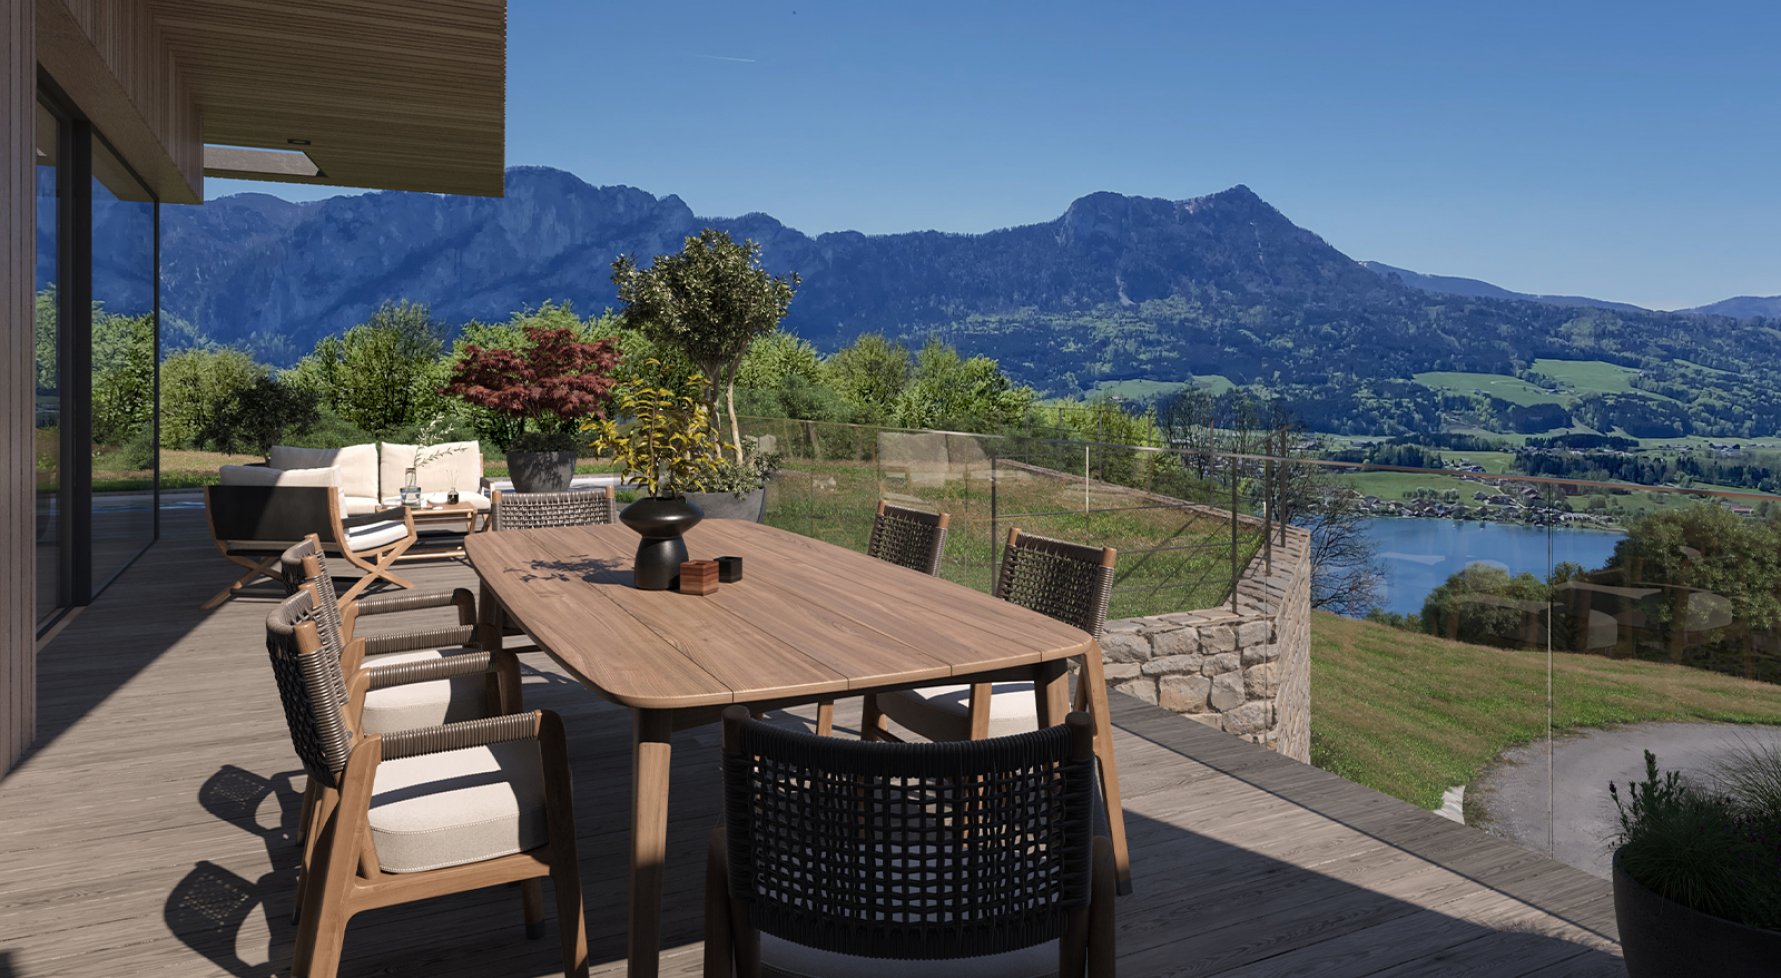 Property in 5310 Oberösterreich - Mondsee: LAKE FEELING! Modern 4-room flat with pool on Lake Mondsee - picture 1